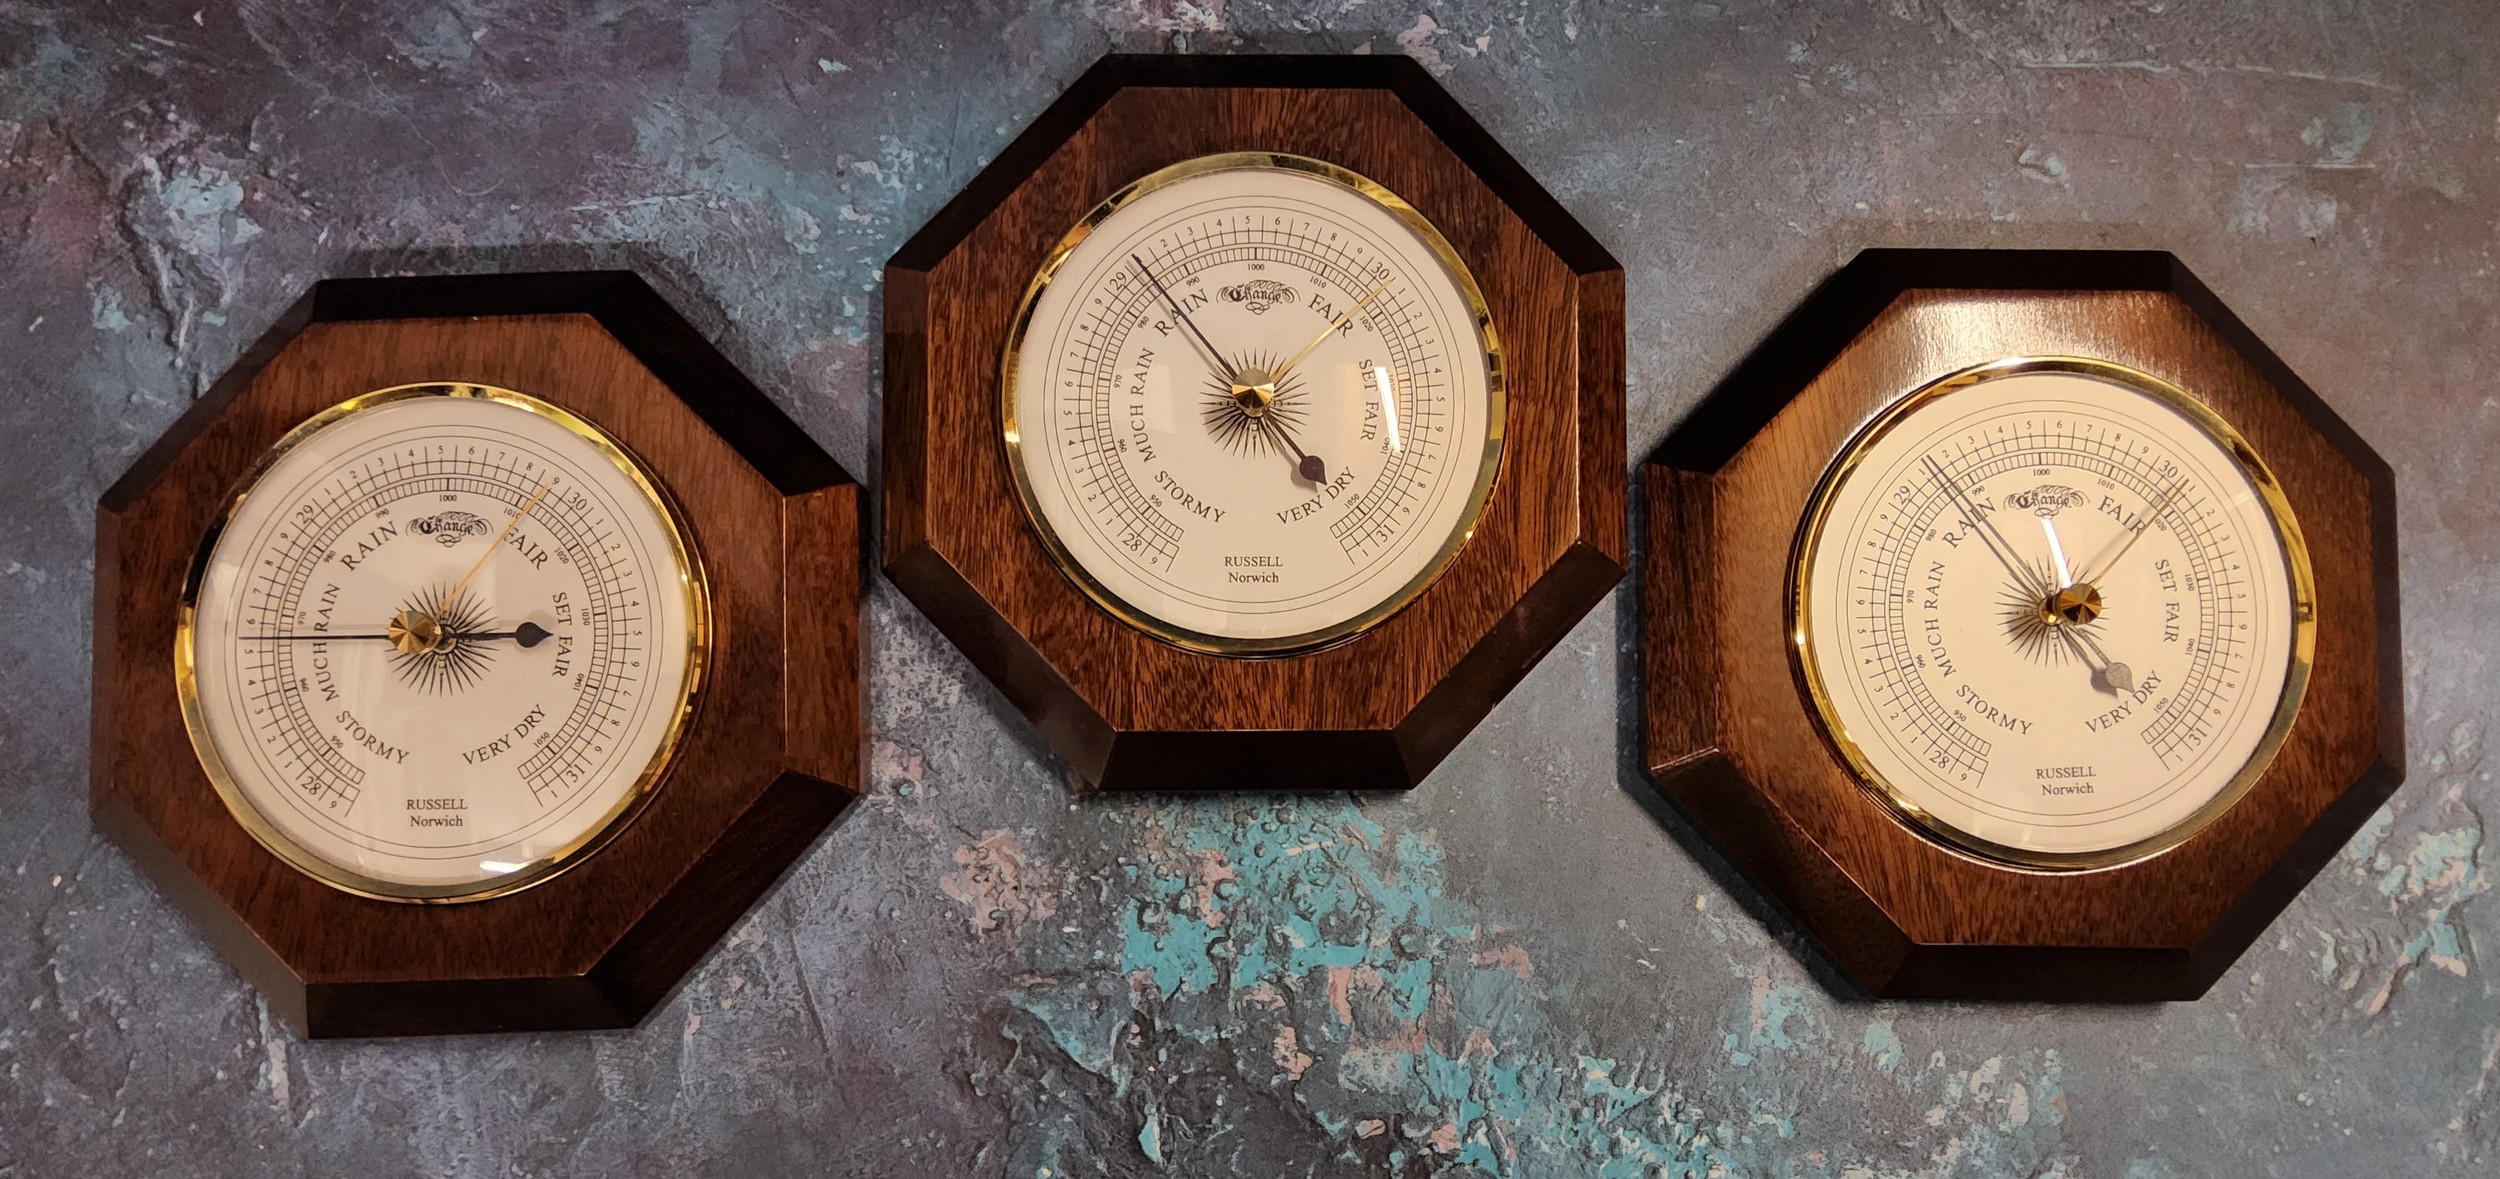 A high gloss mahogany mounted octagonal aneroid barometer, Russell Scientific Instruments; others